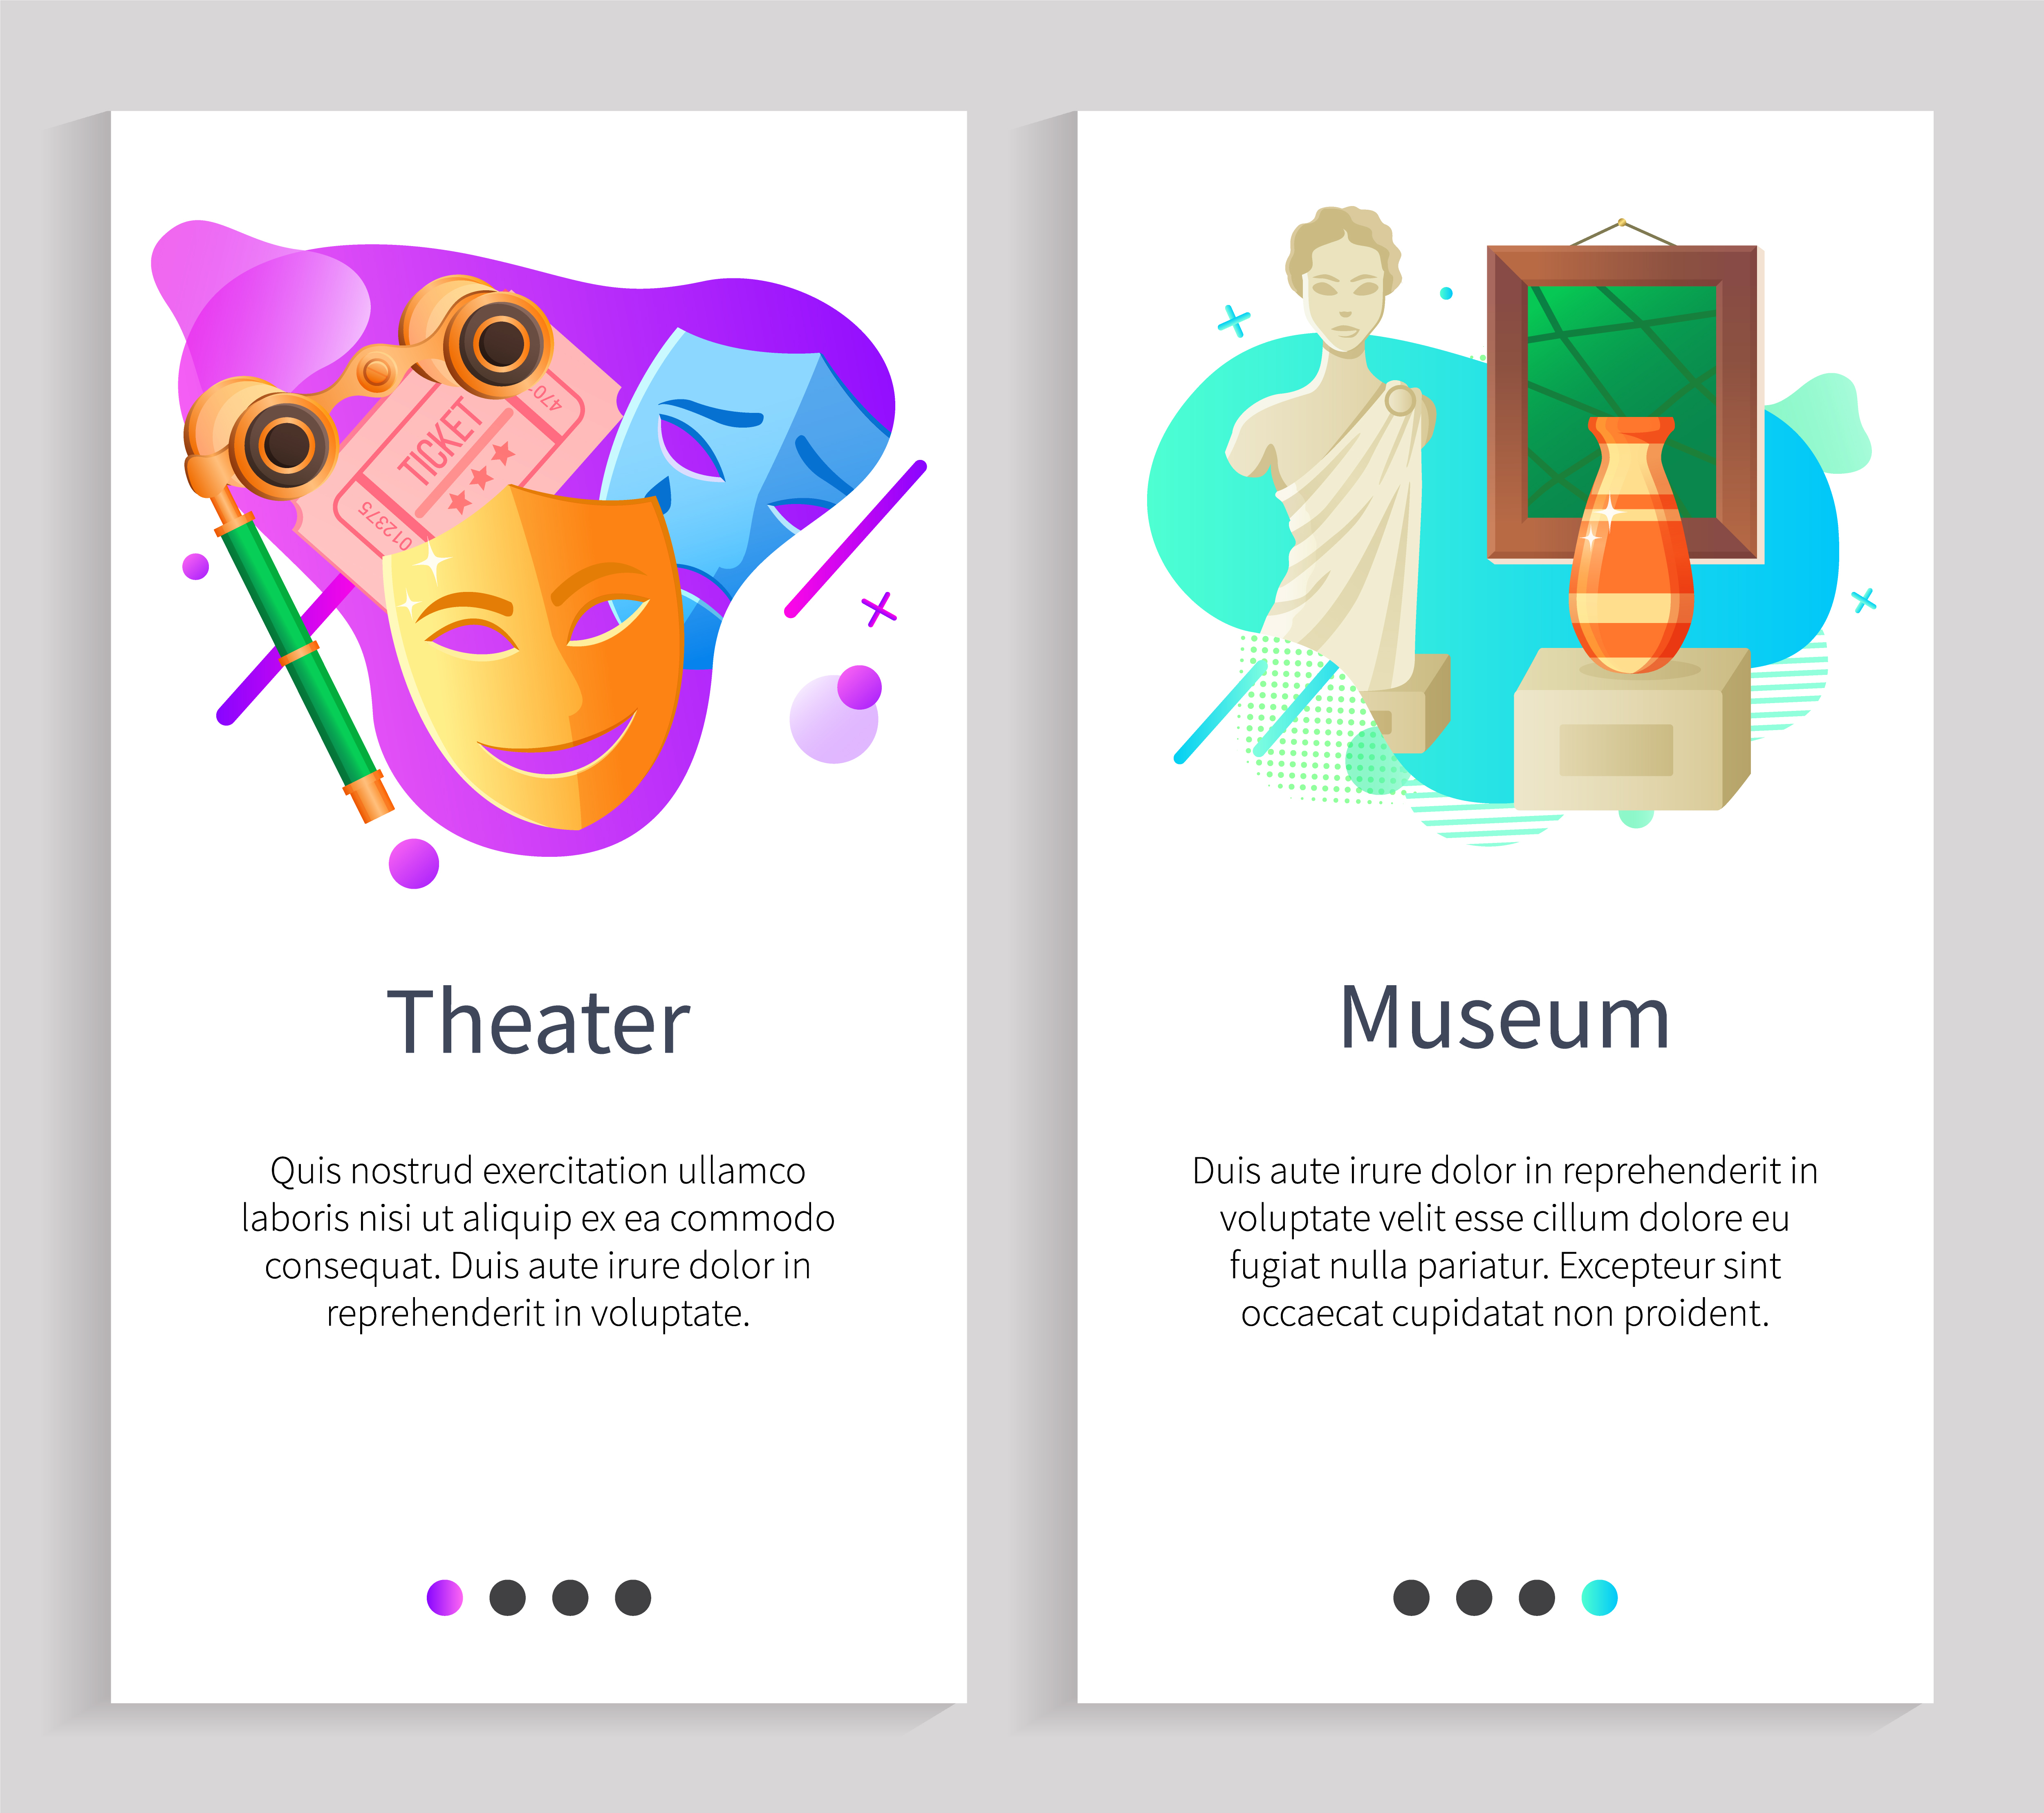 Museum exhibition and theater vector, items collected in one place, sculpture of woman and vase, painting of antiquity. Drama and comedy mask. Website or slider app, landing page flat style. Theater and Museum Cultural Art Centers Vector